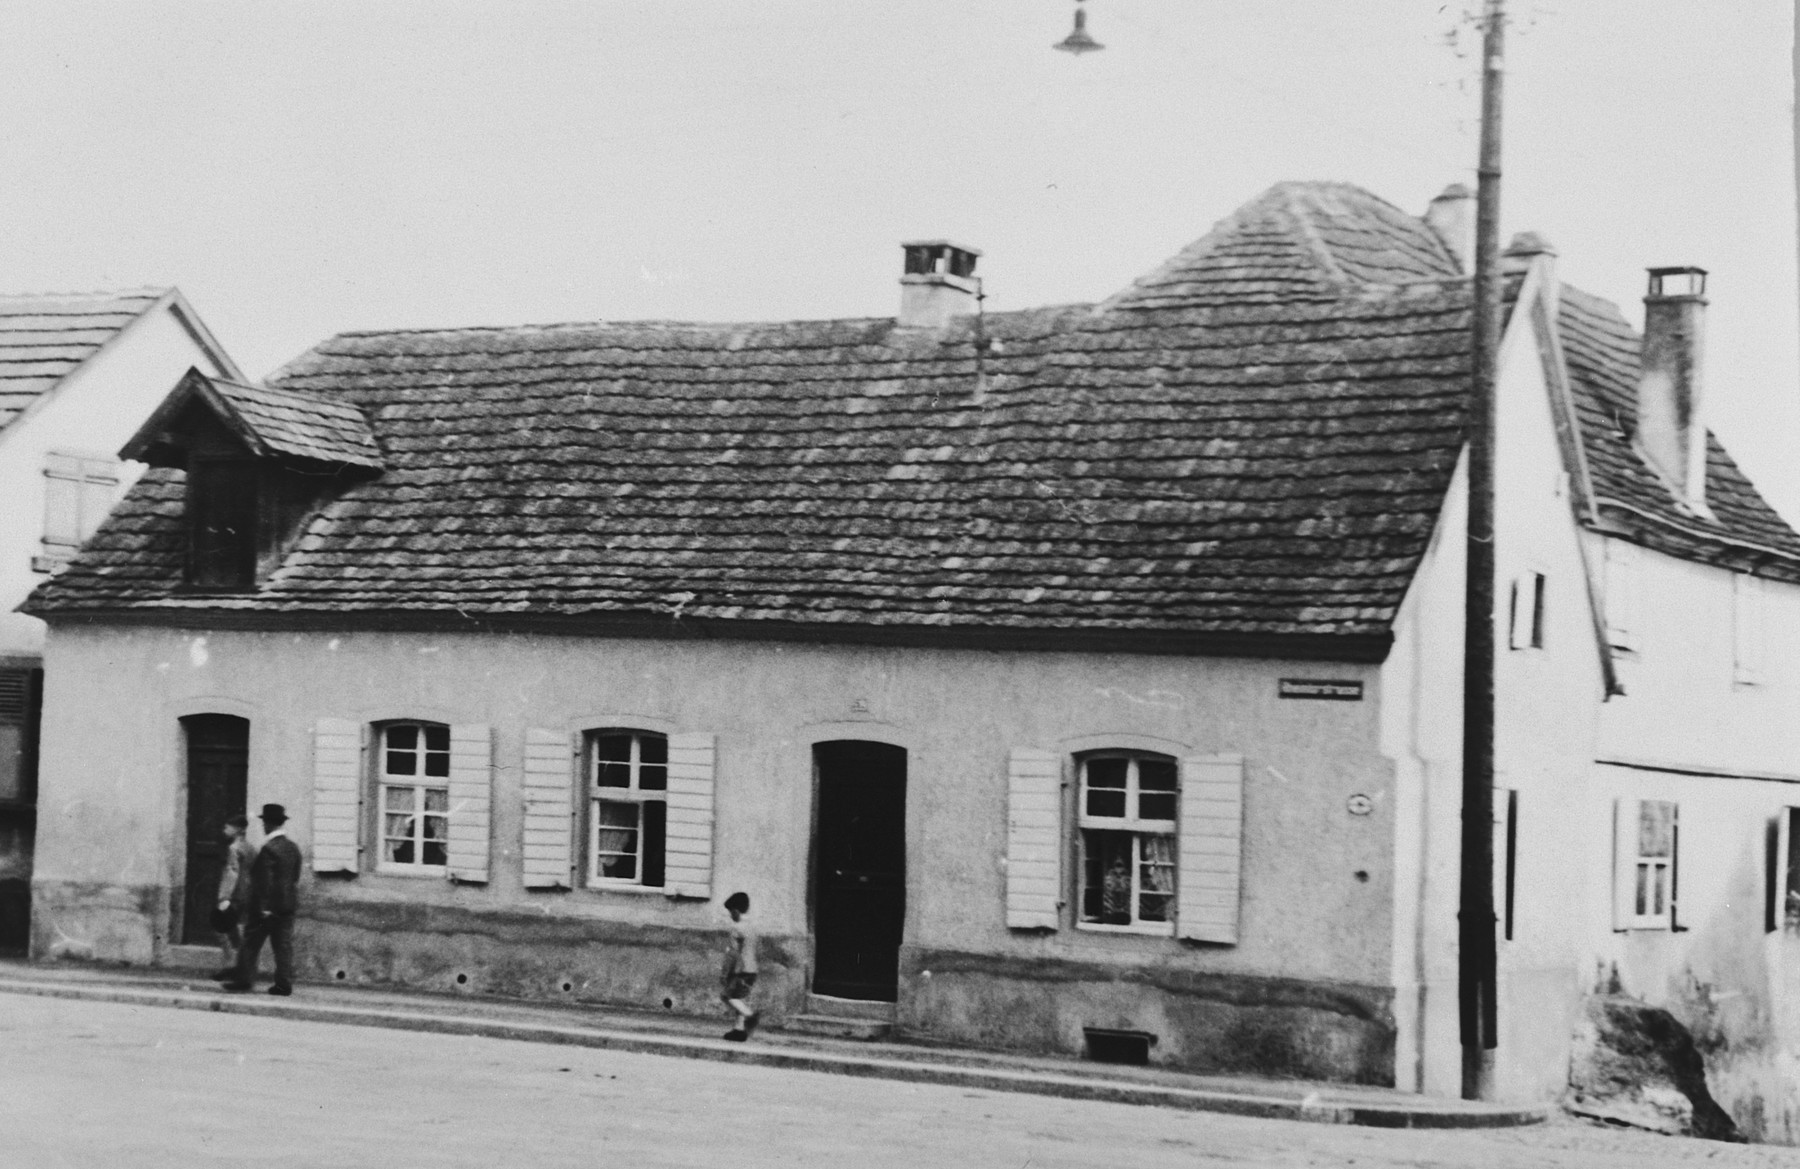 Exterior view of the home of Raphael Bähr (the father of Hermann and Julius) on Judengasse in Breisach.  

This house was one of five homes destroyed during the bombing of the town at the end of the war.  Most of the other Jewish homes were not destroyed.

This is part of series of photographs taken of the Breisach Jewish community 1937.  In October 1940 the entire community was deported to the Gurs internment camp in southern France.